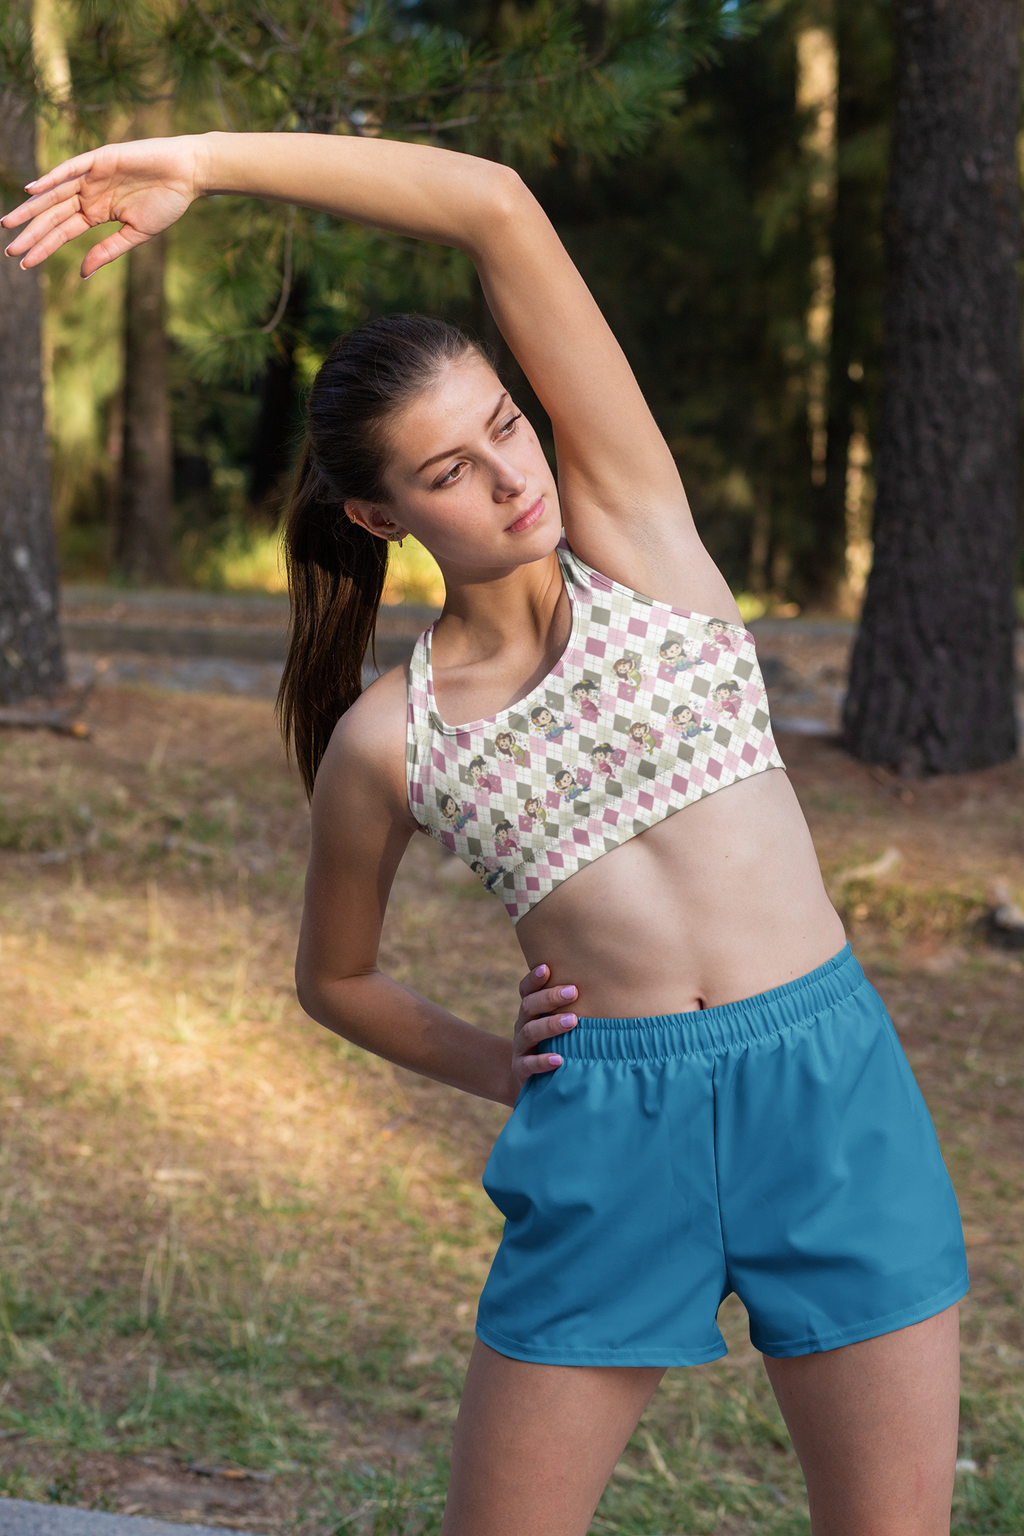 sports-bra-mockup-featuring-a-woman-with-shorts-stretching-33085.png